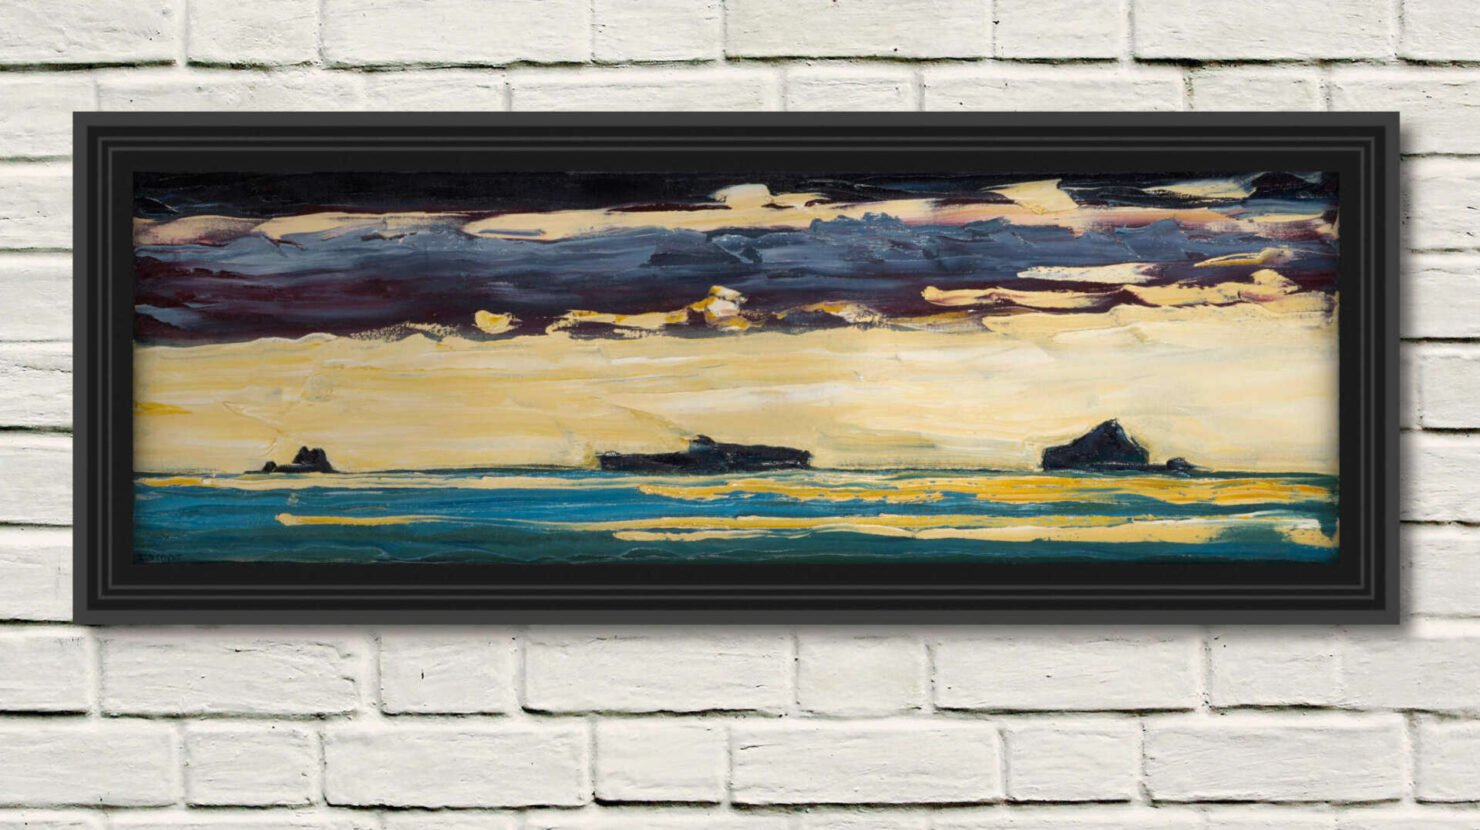 artist rod coyne's landscape "Atlantic Islands" is shown here in a black frame on a white wall.